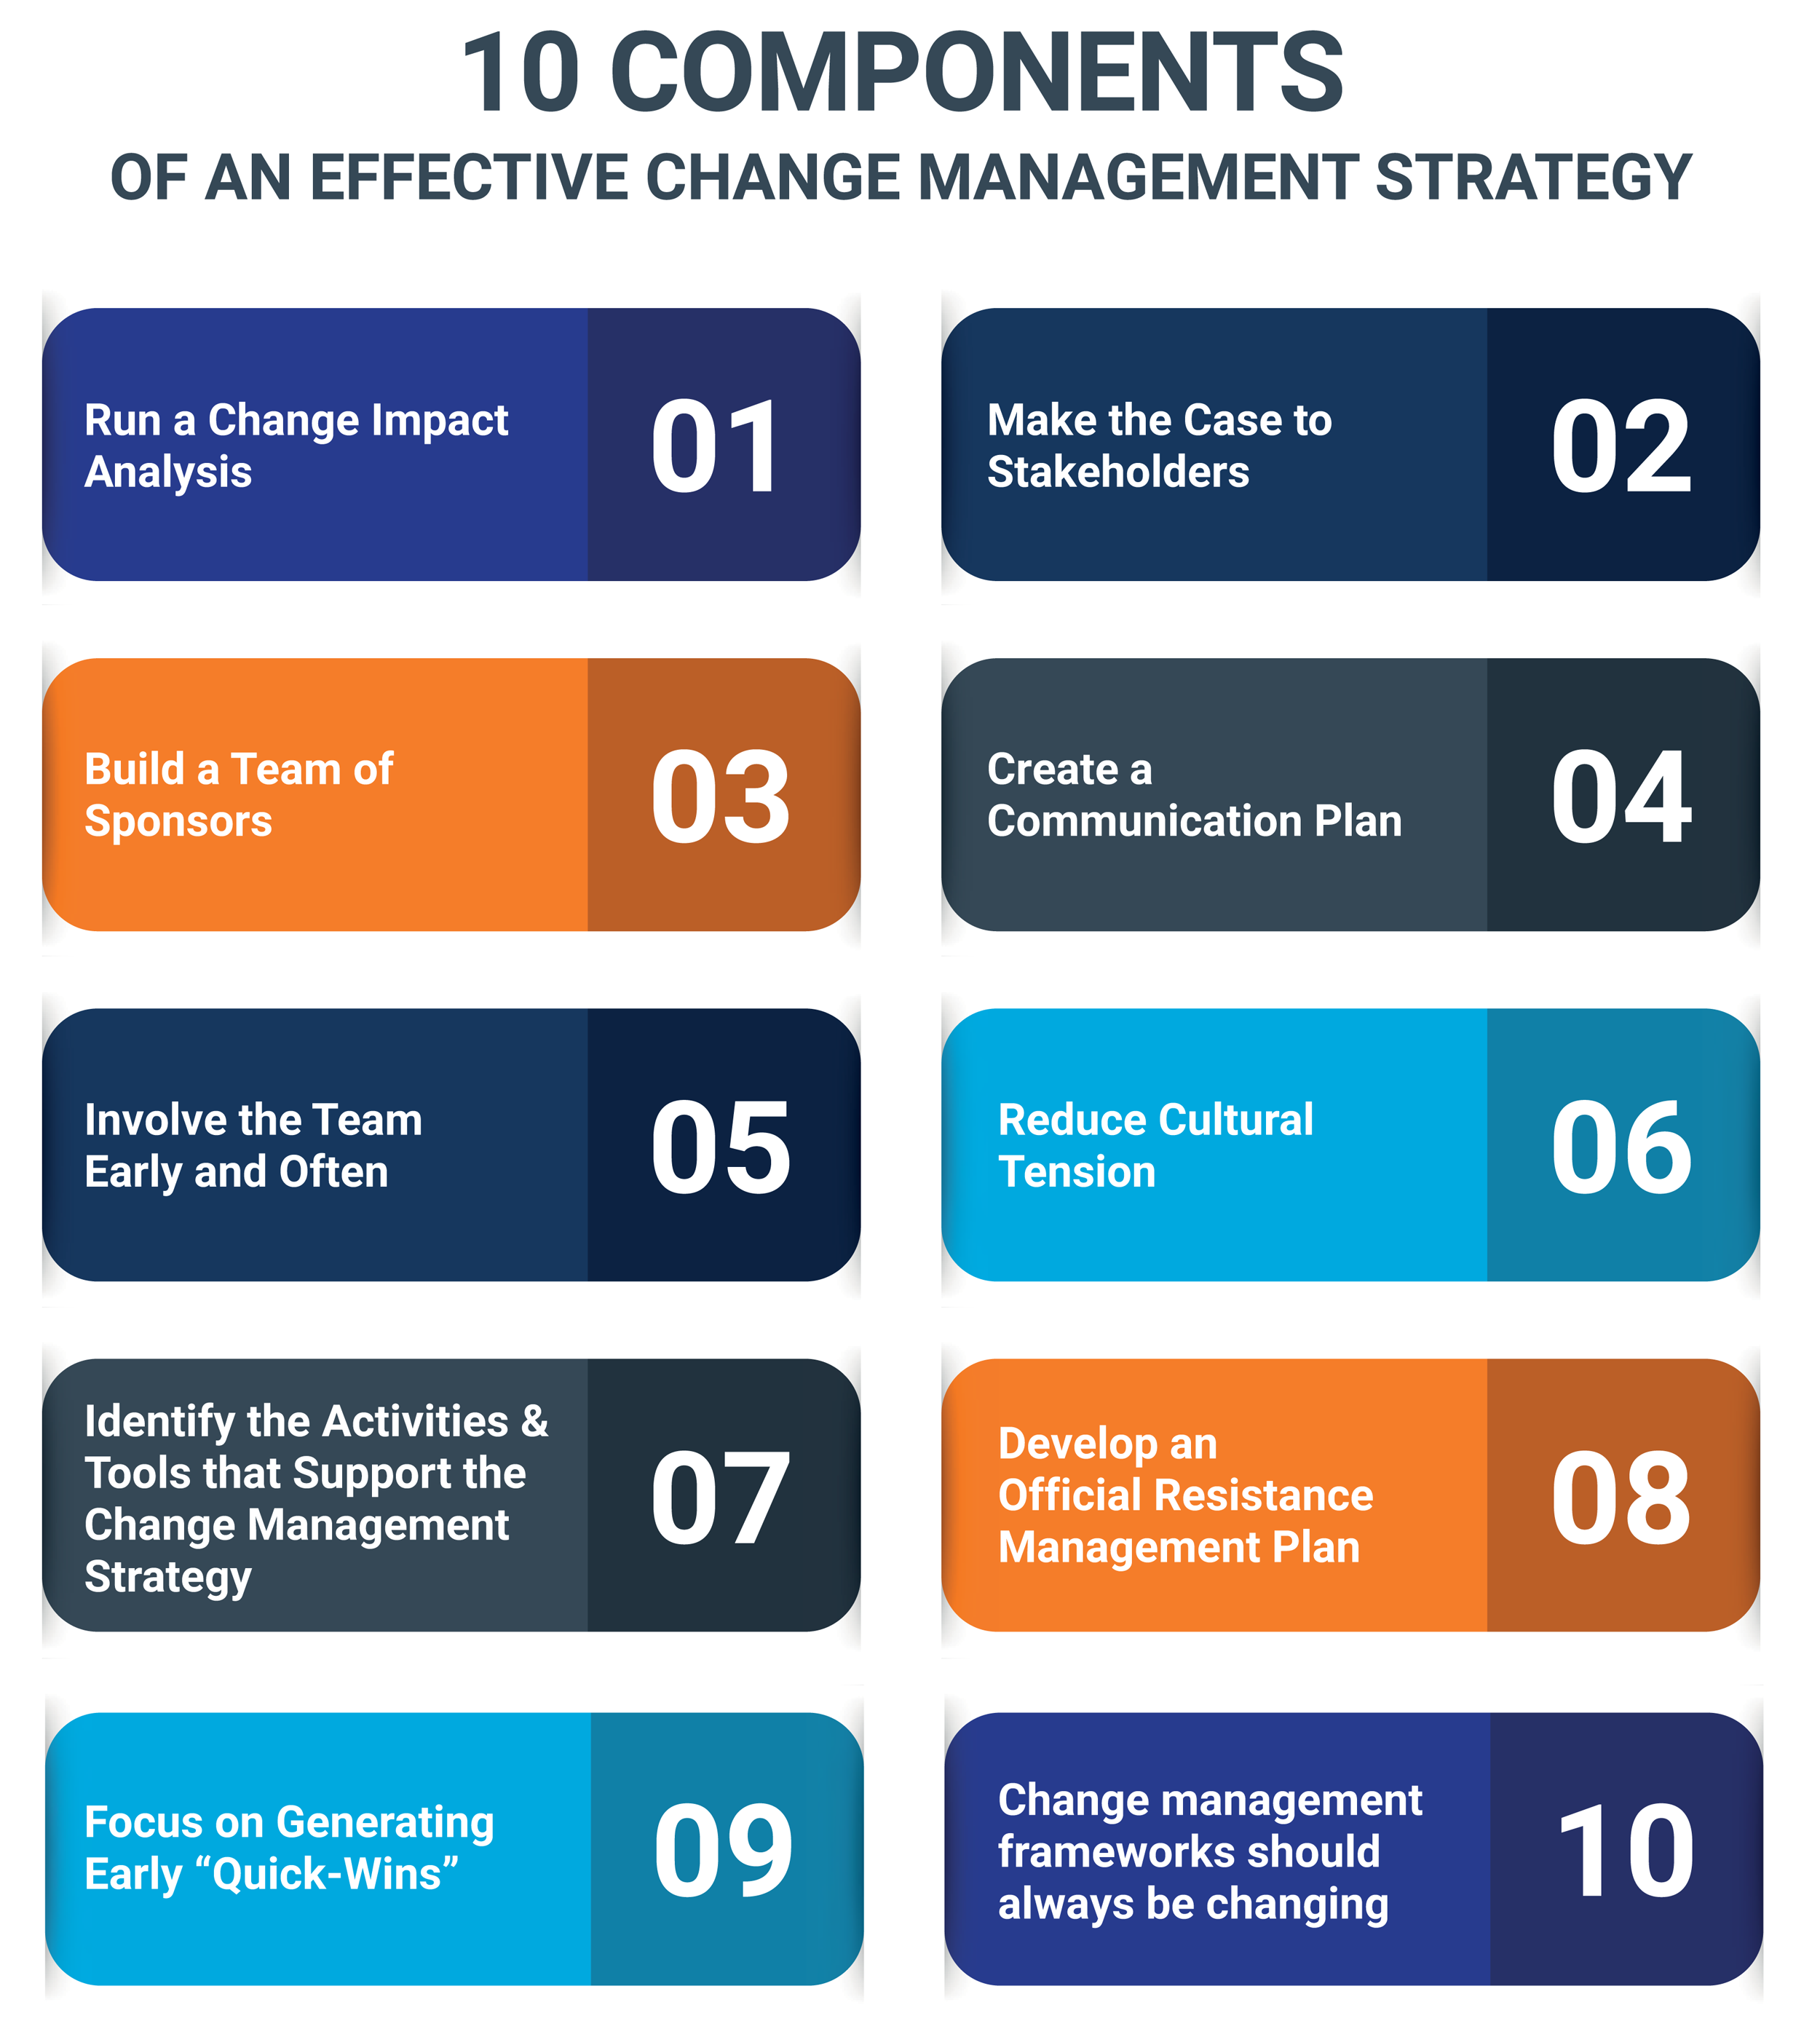 10 Components of an Effective Change Management Strategy | 3Pillar Global